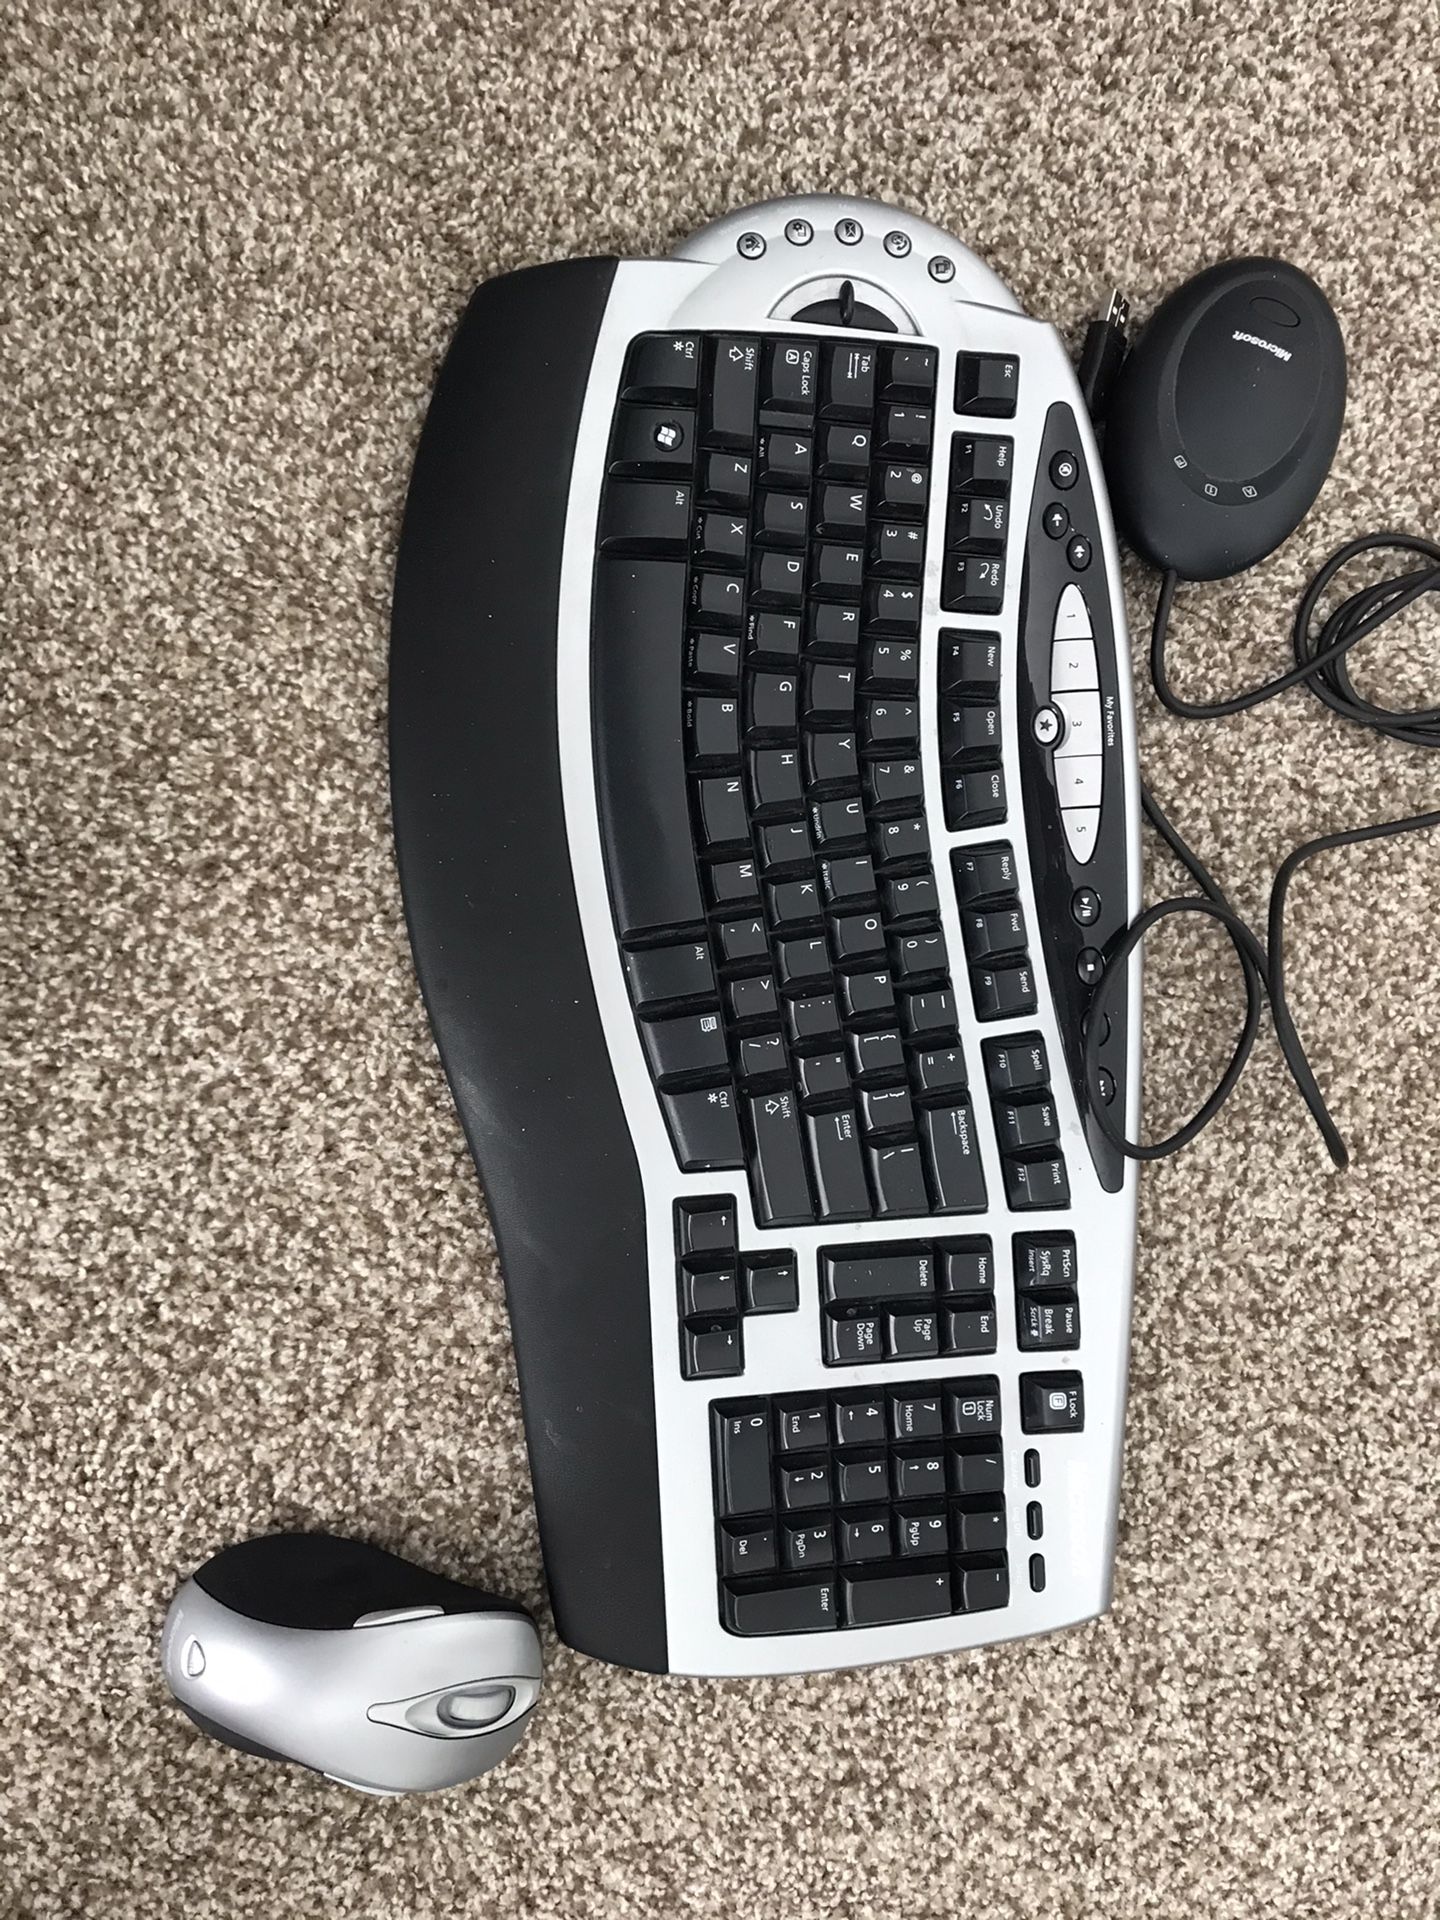 Microsoft natural ergonomic keyboard and mouse model# 4000 wireless ..must sell.. buy it today